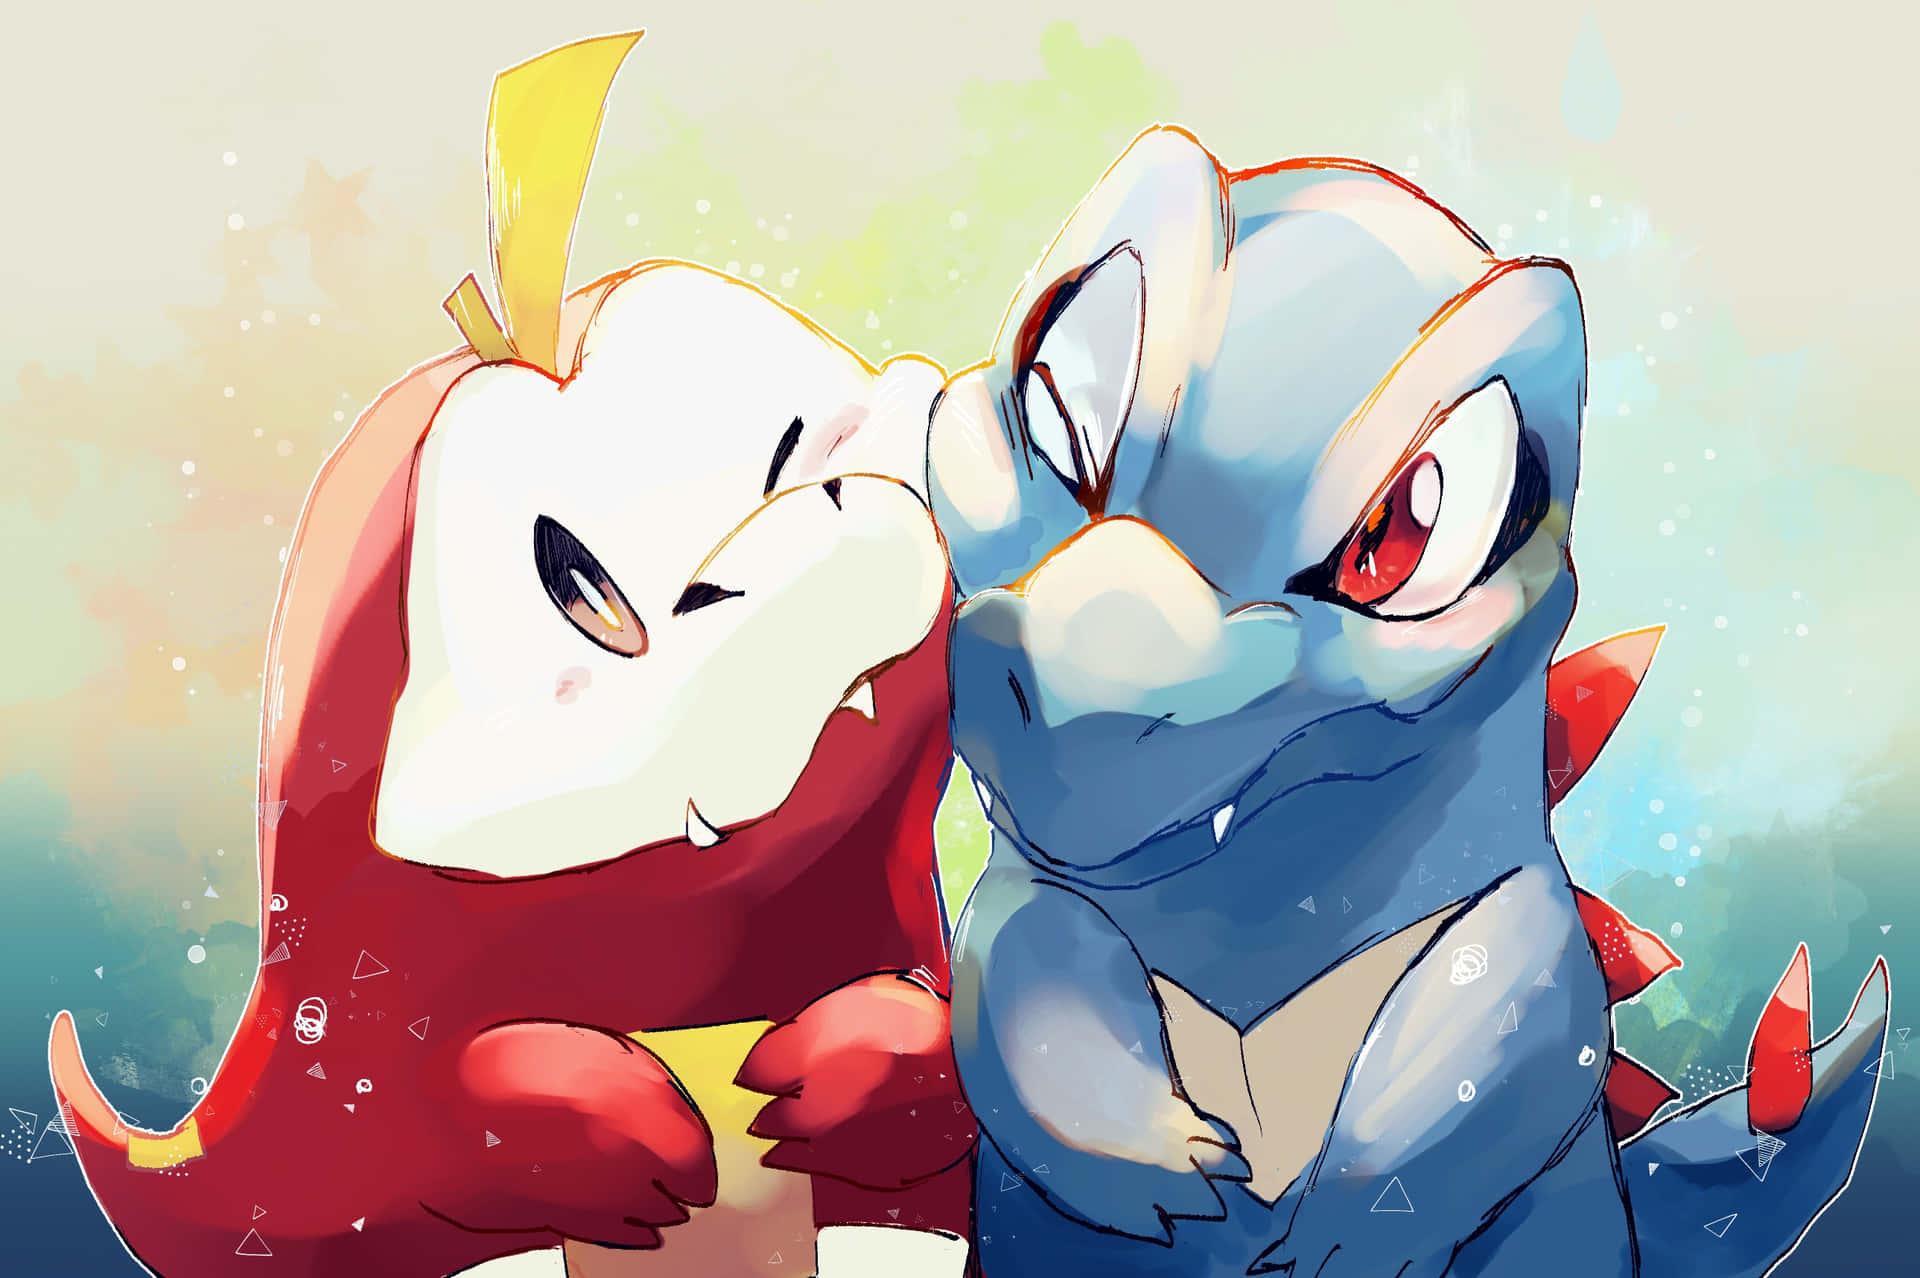 Sweet Photo Of Fuecoco And Totodile